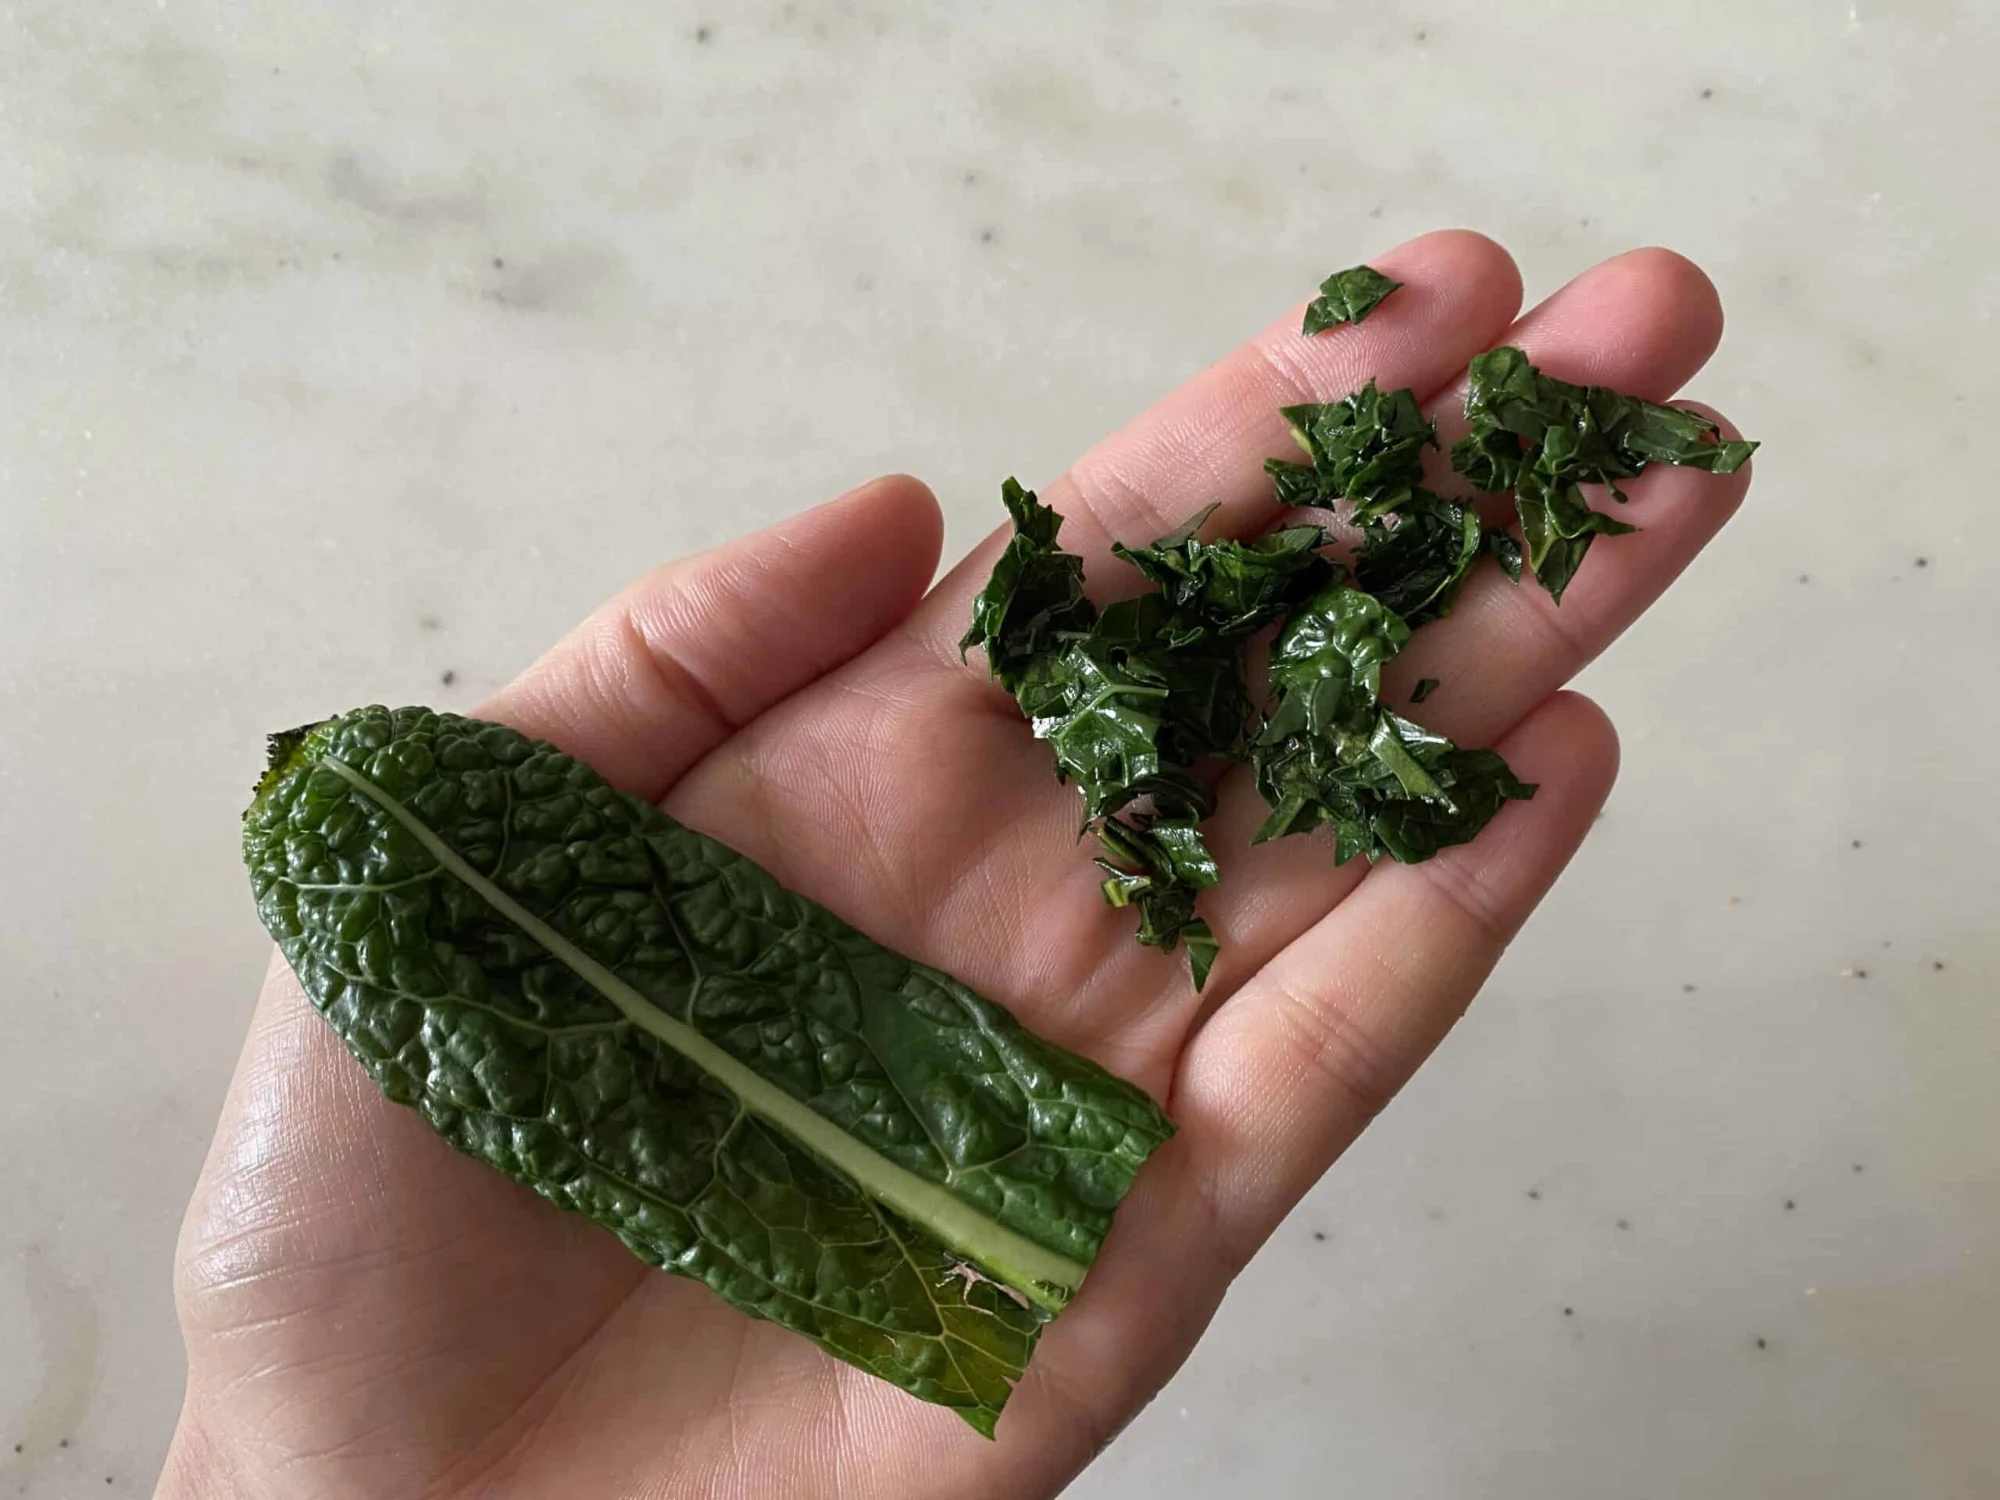 a hand holding a whole cooked kale leaf and minced, cooked kale for babies starting solids